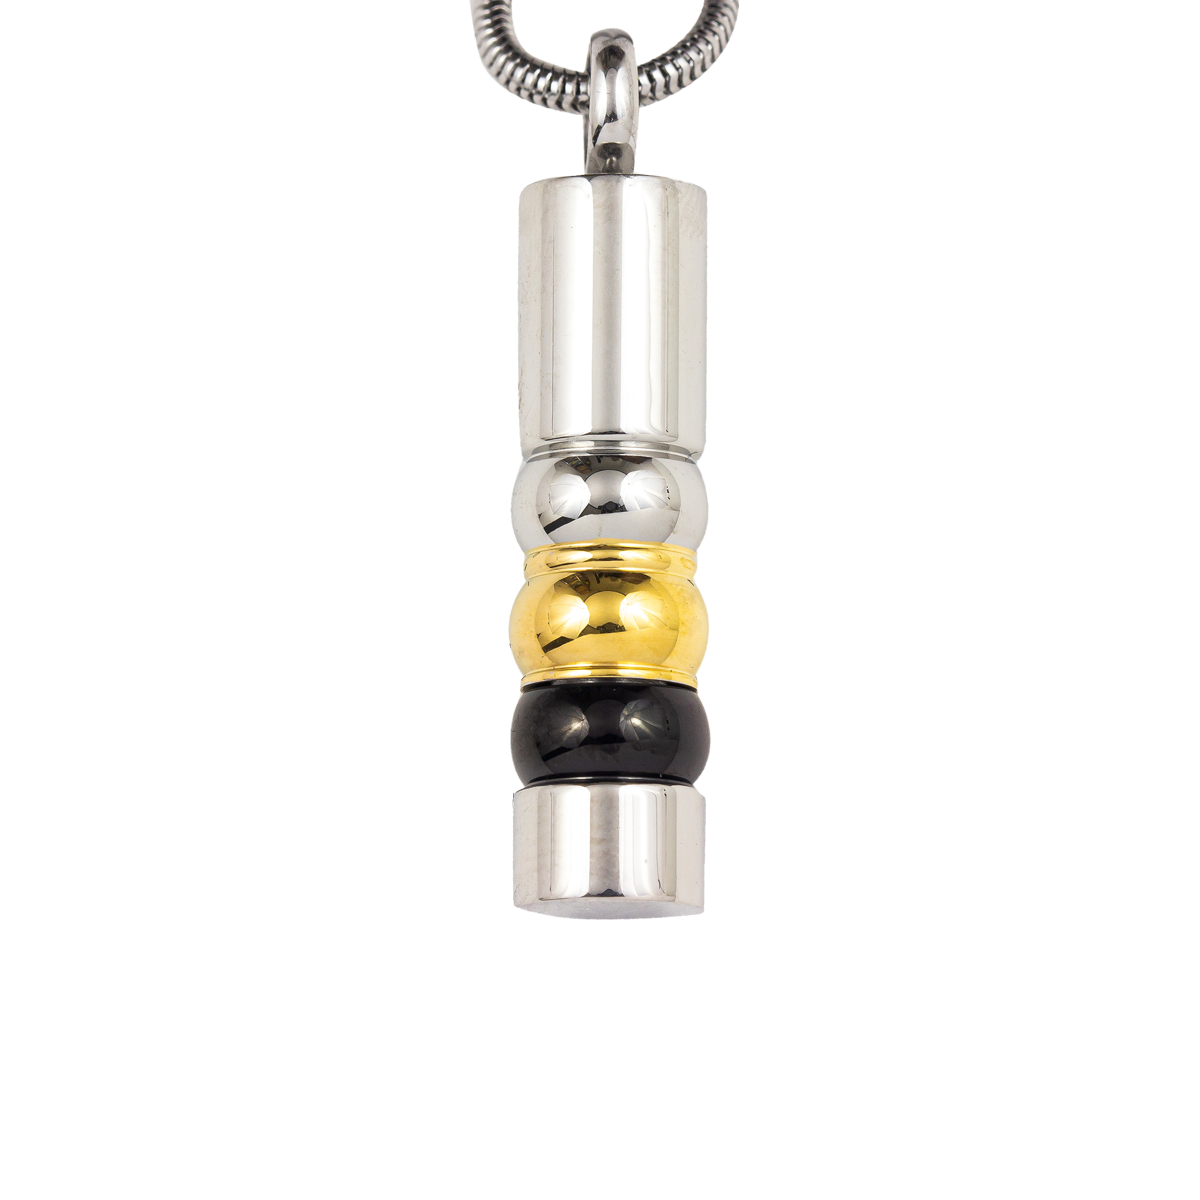 Tri-Coloured Cylinder Stainless Steel Pendant